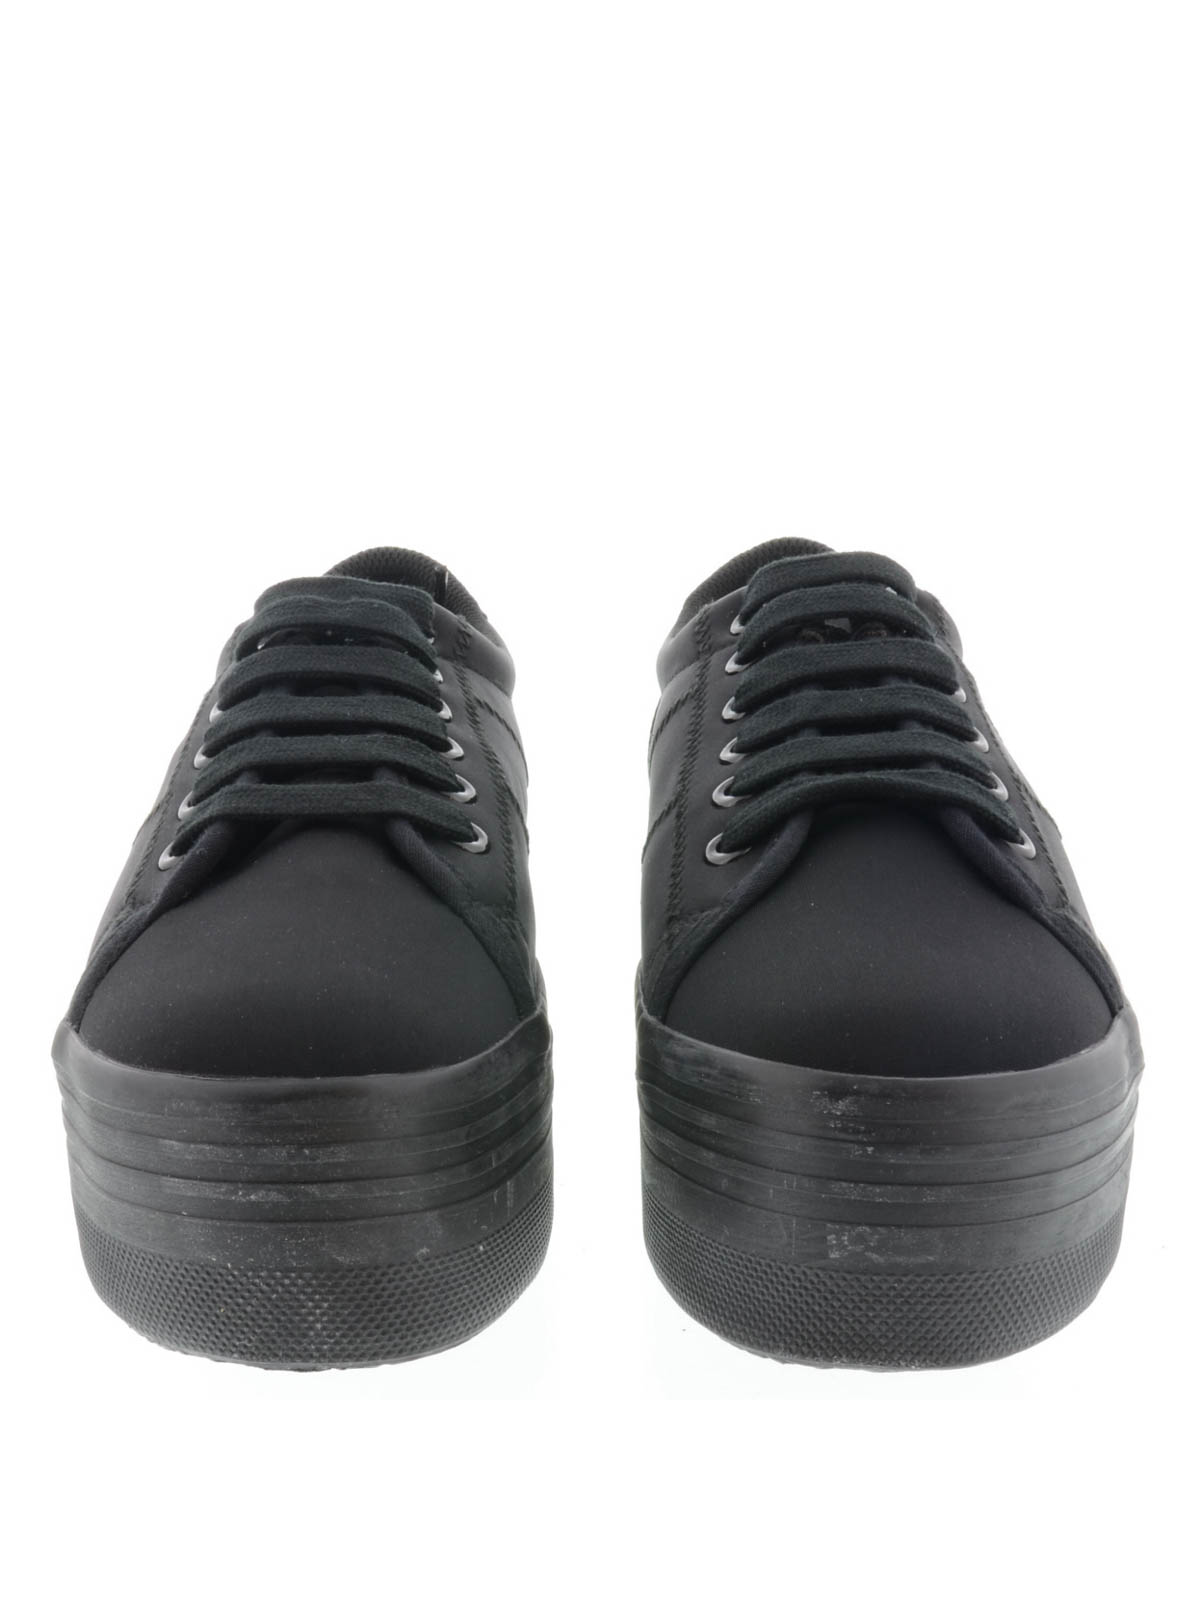 Trainers Jeffrey Campbell - Zomg sneakers - ZOMGNEOPRENEBLACK